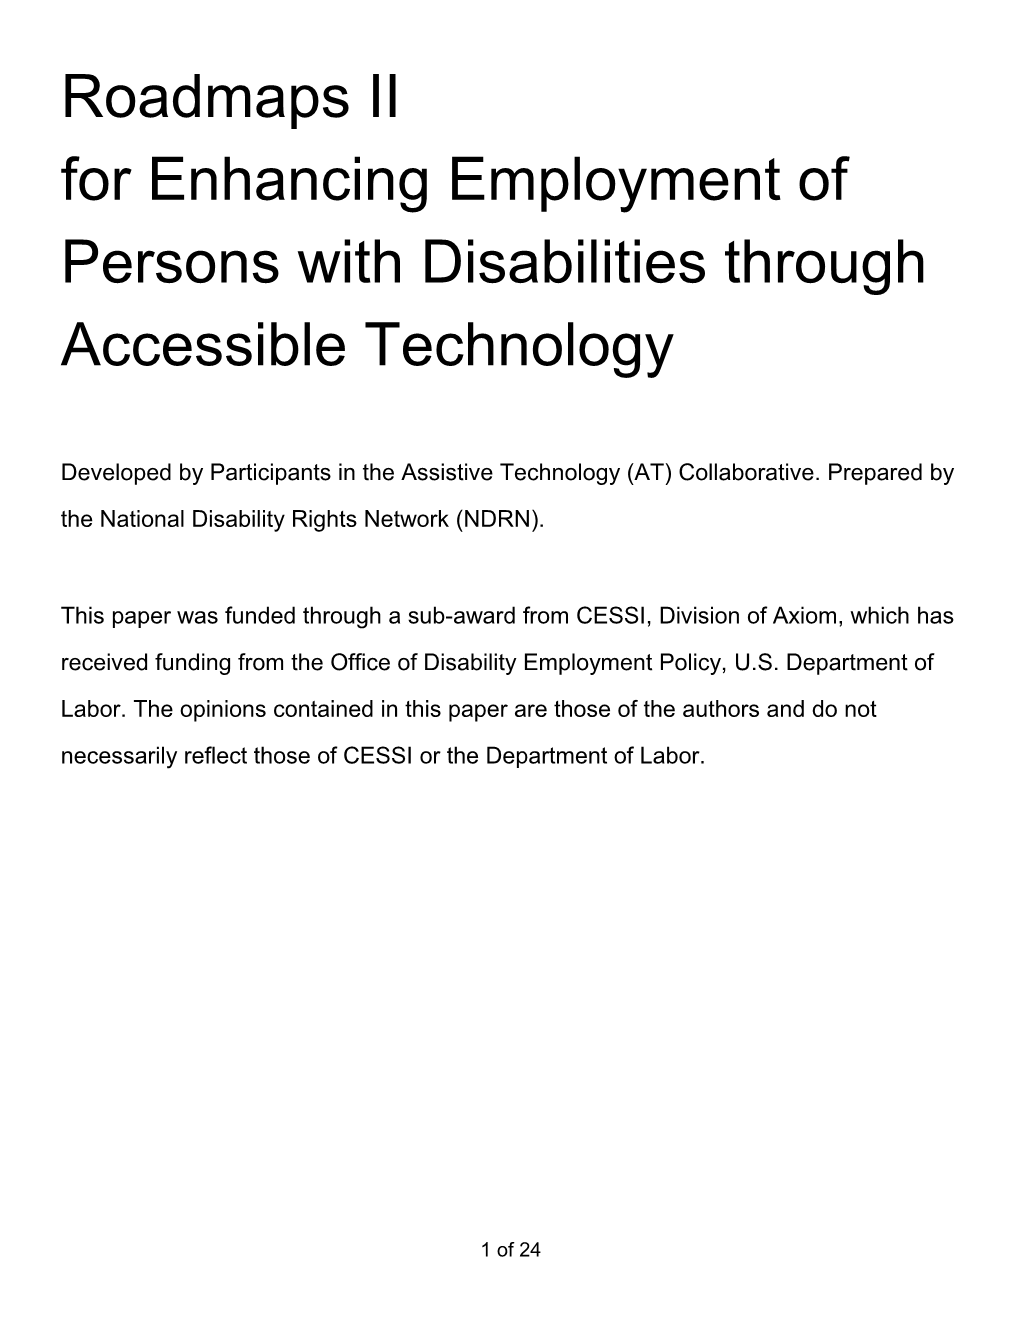 Roadmaps II for Enhancing Employment of Persons with Disabilities Through Accessible Technology